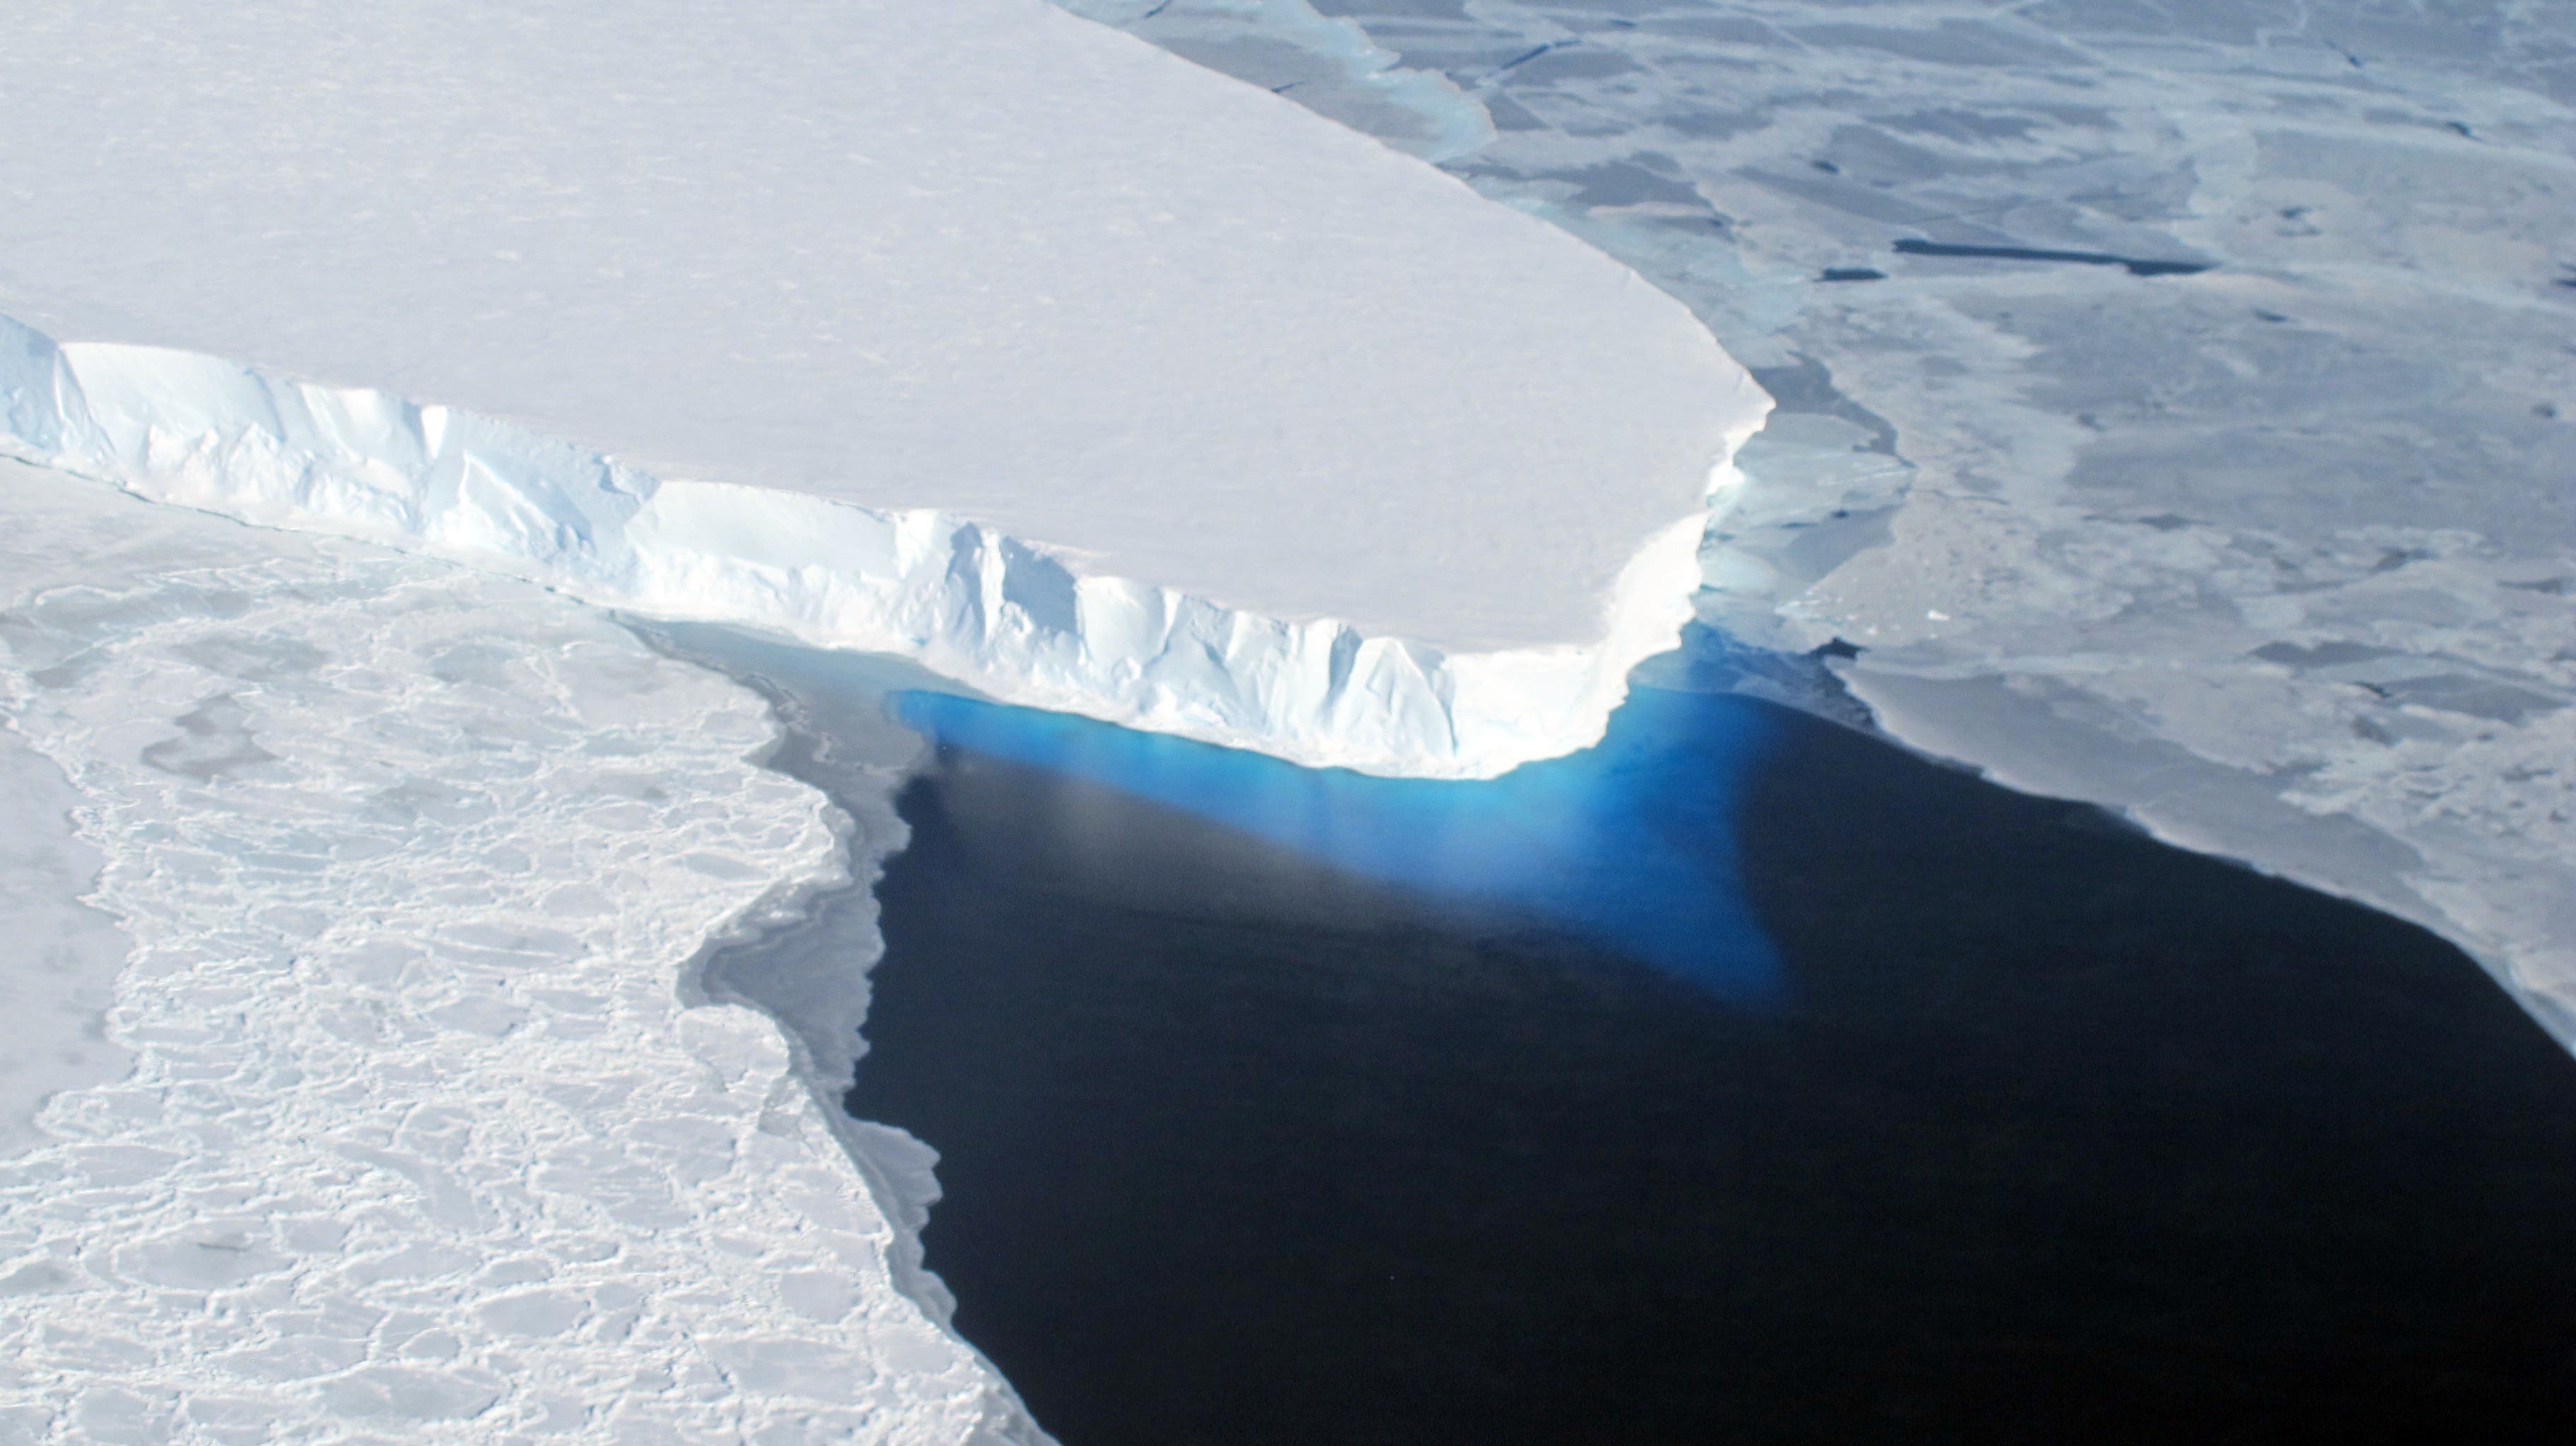 <p>The Thwaites Glacier, pictured, is melting at a higher rate than previously estimated, according to a new peer-reviewed study</p>